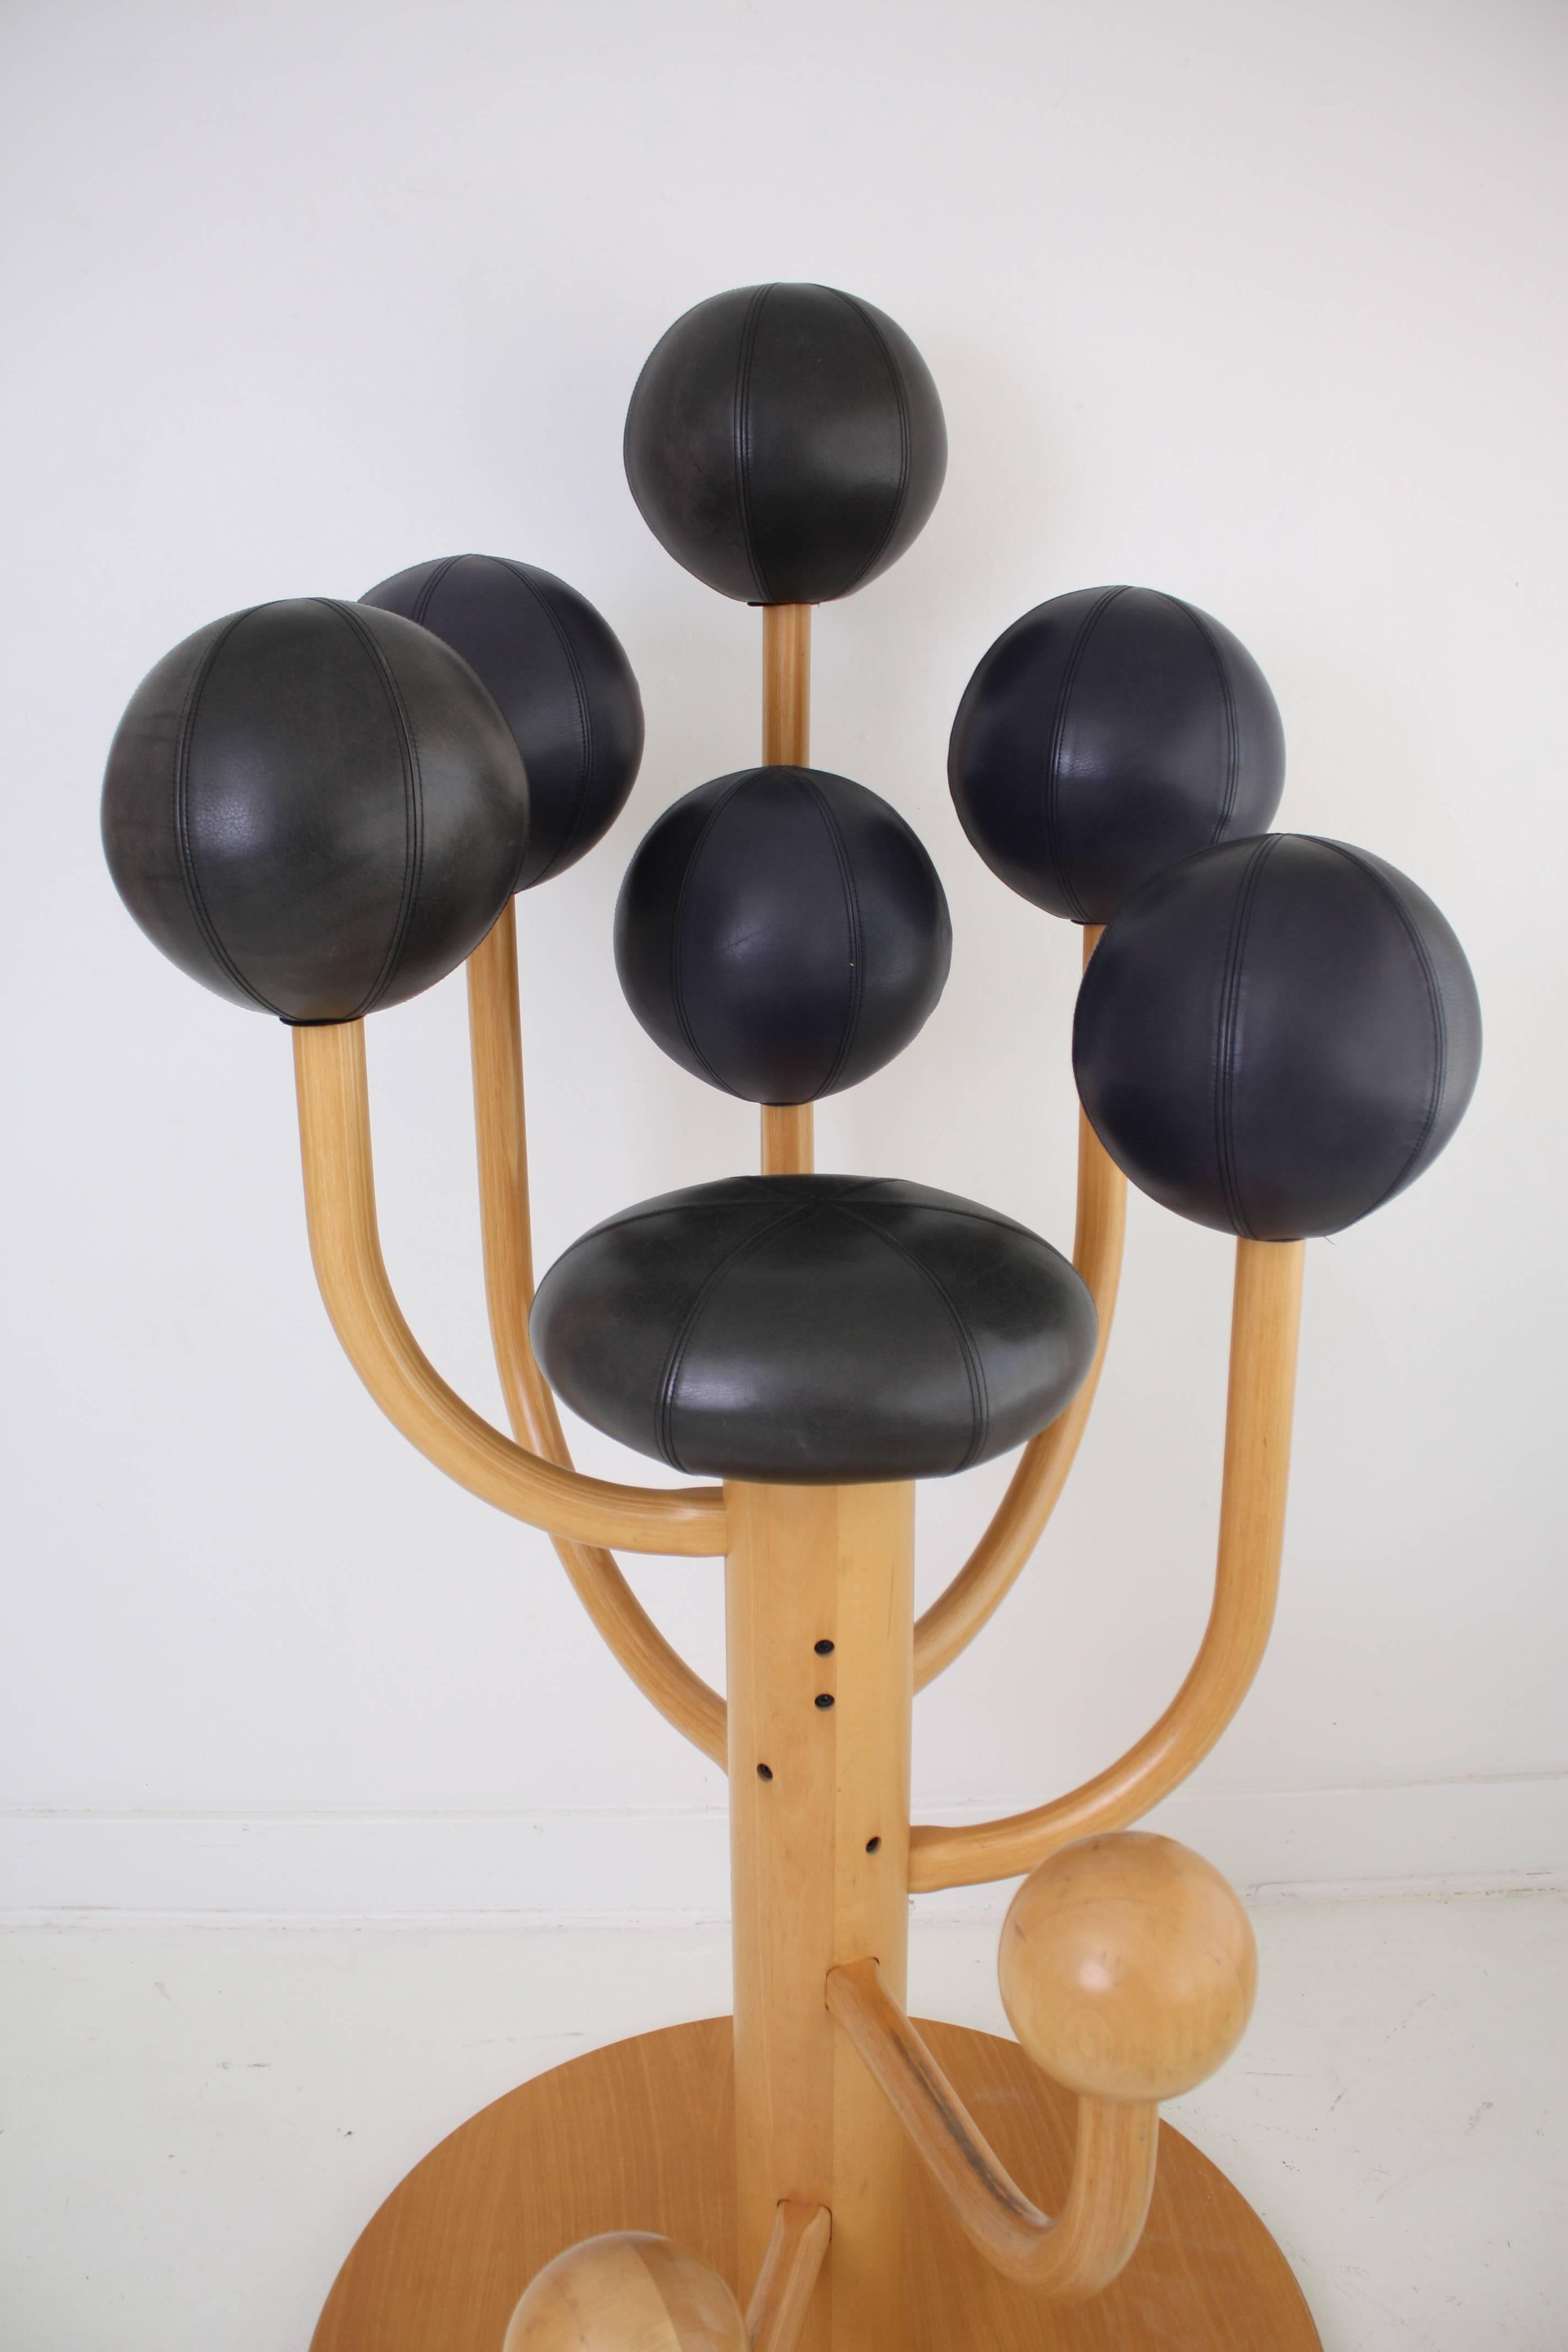 Large throne like chair. Designed to emulate sitting in a tree full of fruit, a very convivial sitting experience. Cushions are upholstered in a black and blue/black leather.